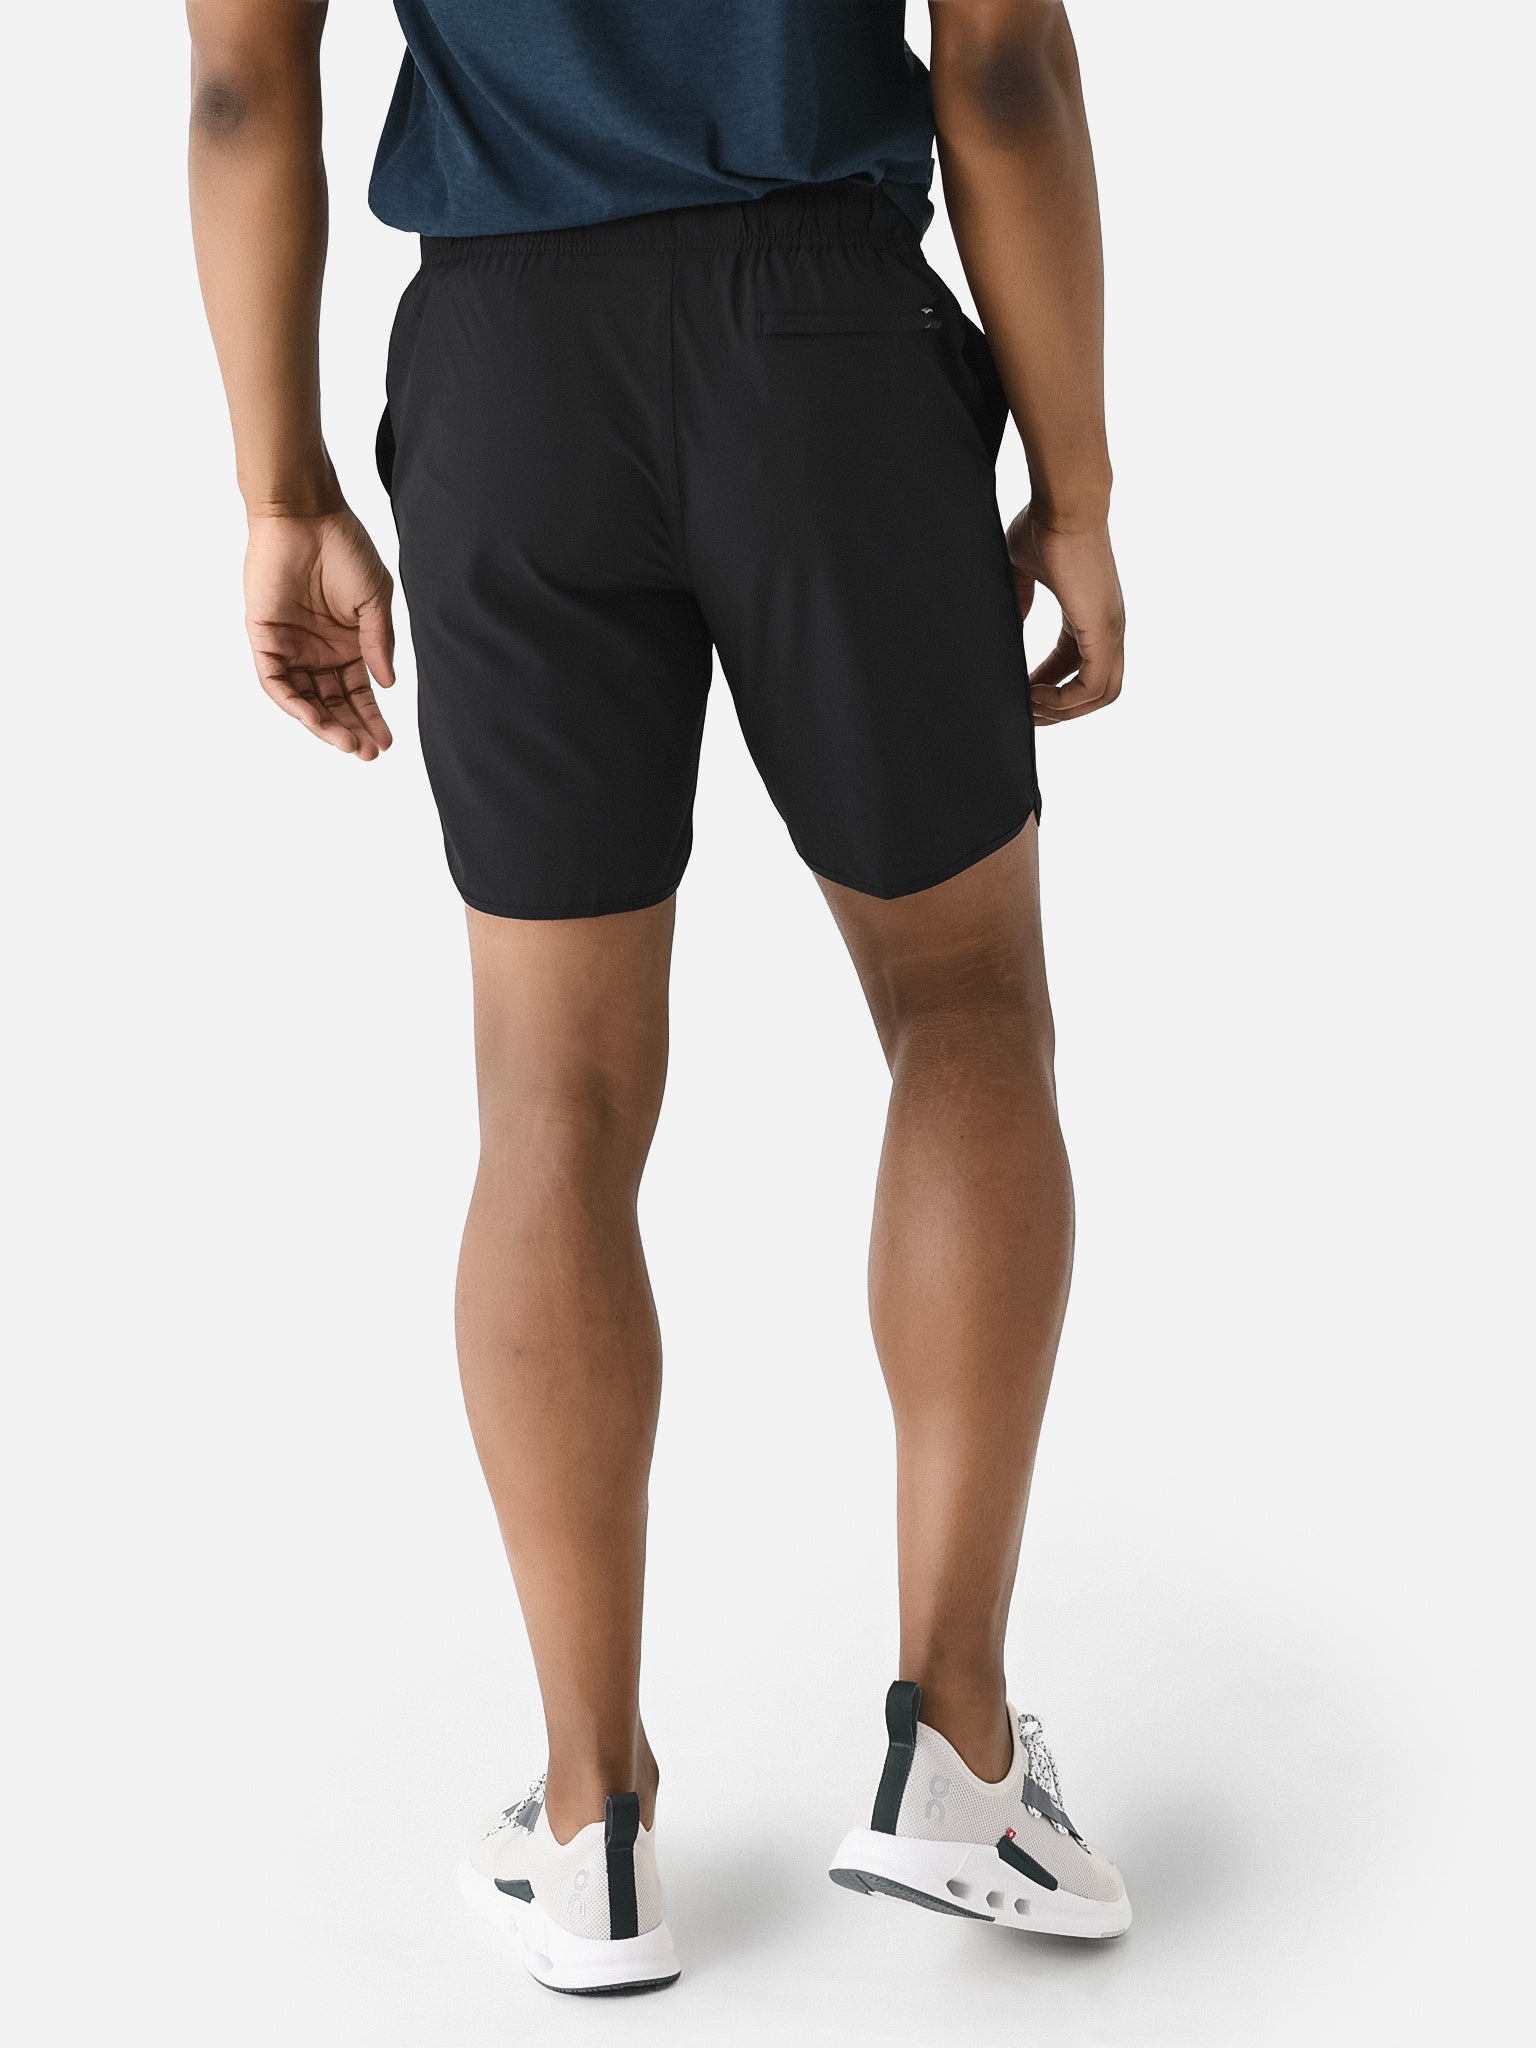 BALANCE COLLECTION Mens 9 Inseam-Wicking ACTIVEWEAR SHORTS-Size S-Blck  Camo-NWT